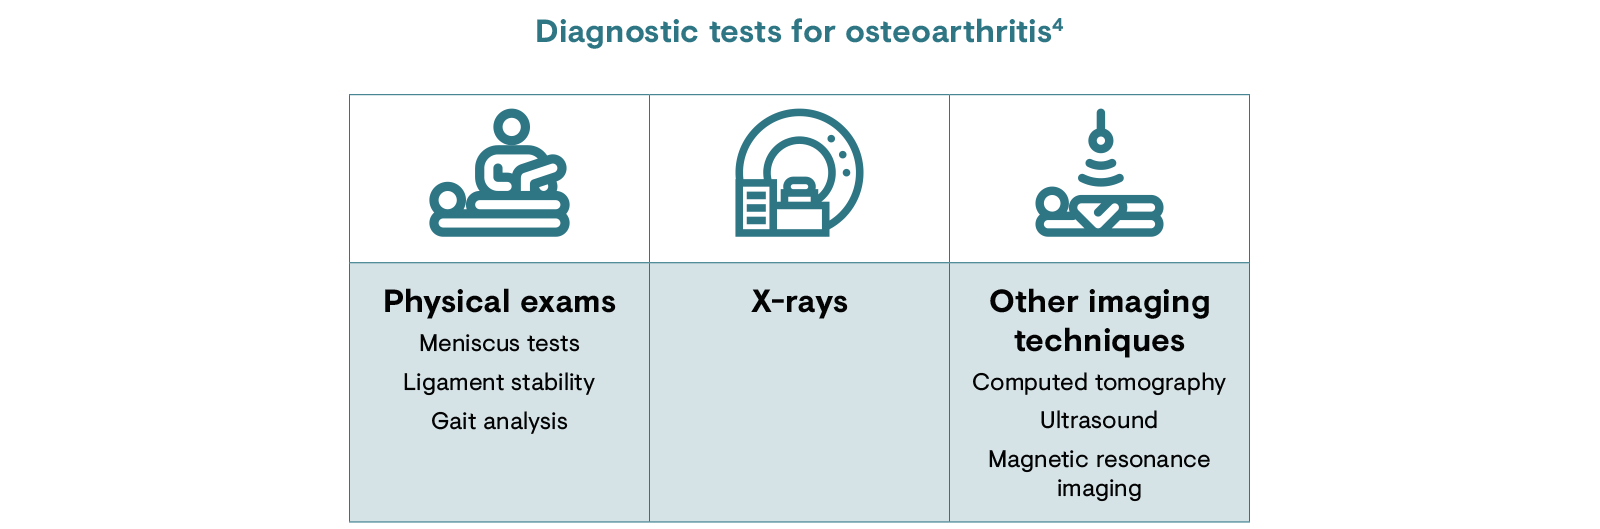 Diagnostic tests for osteoarthritis